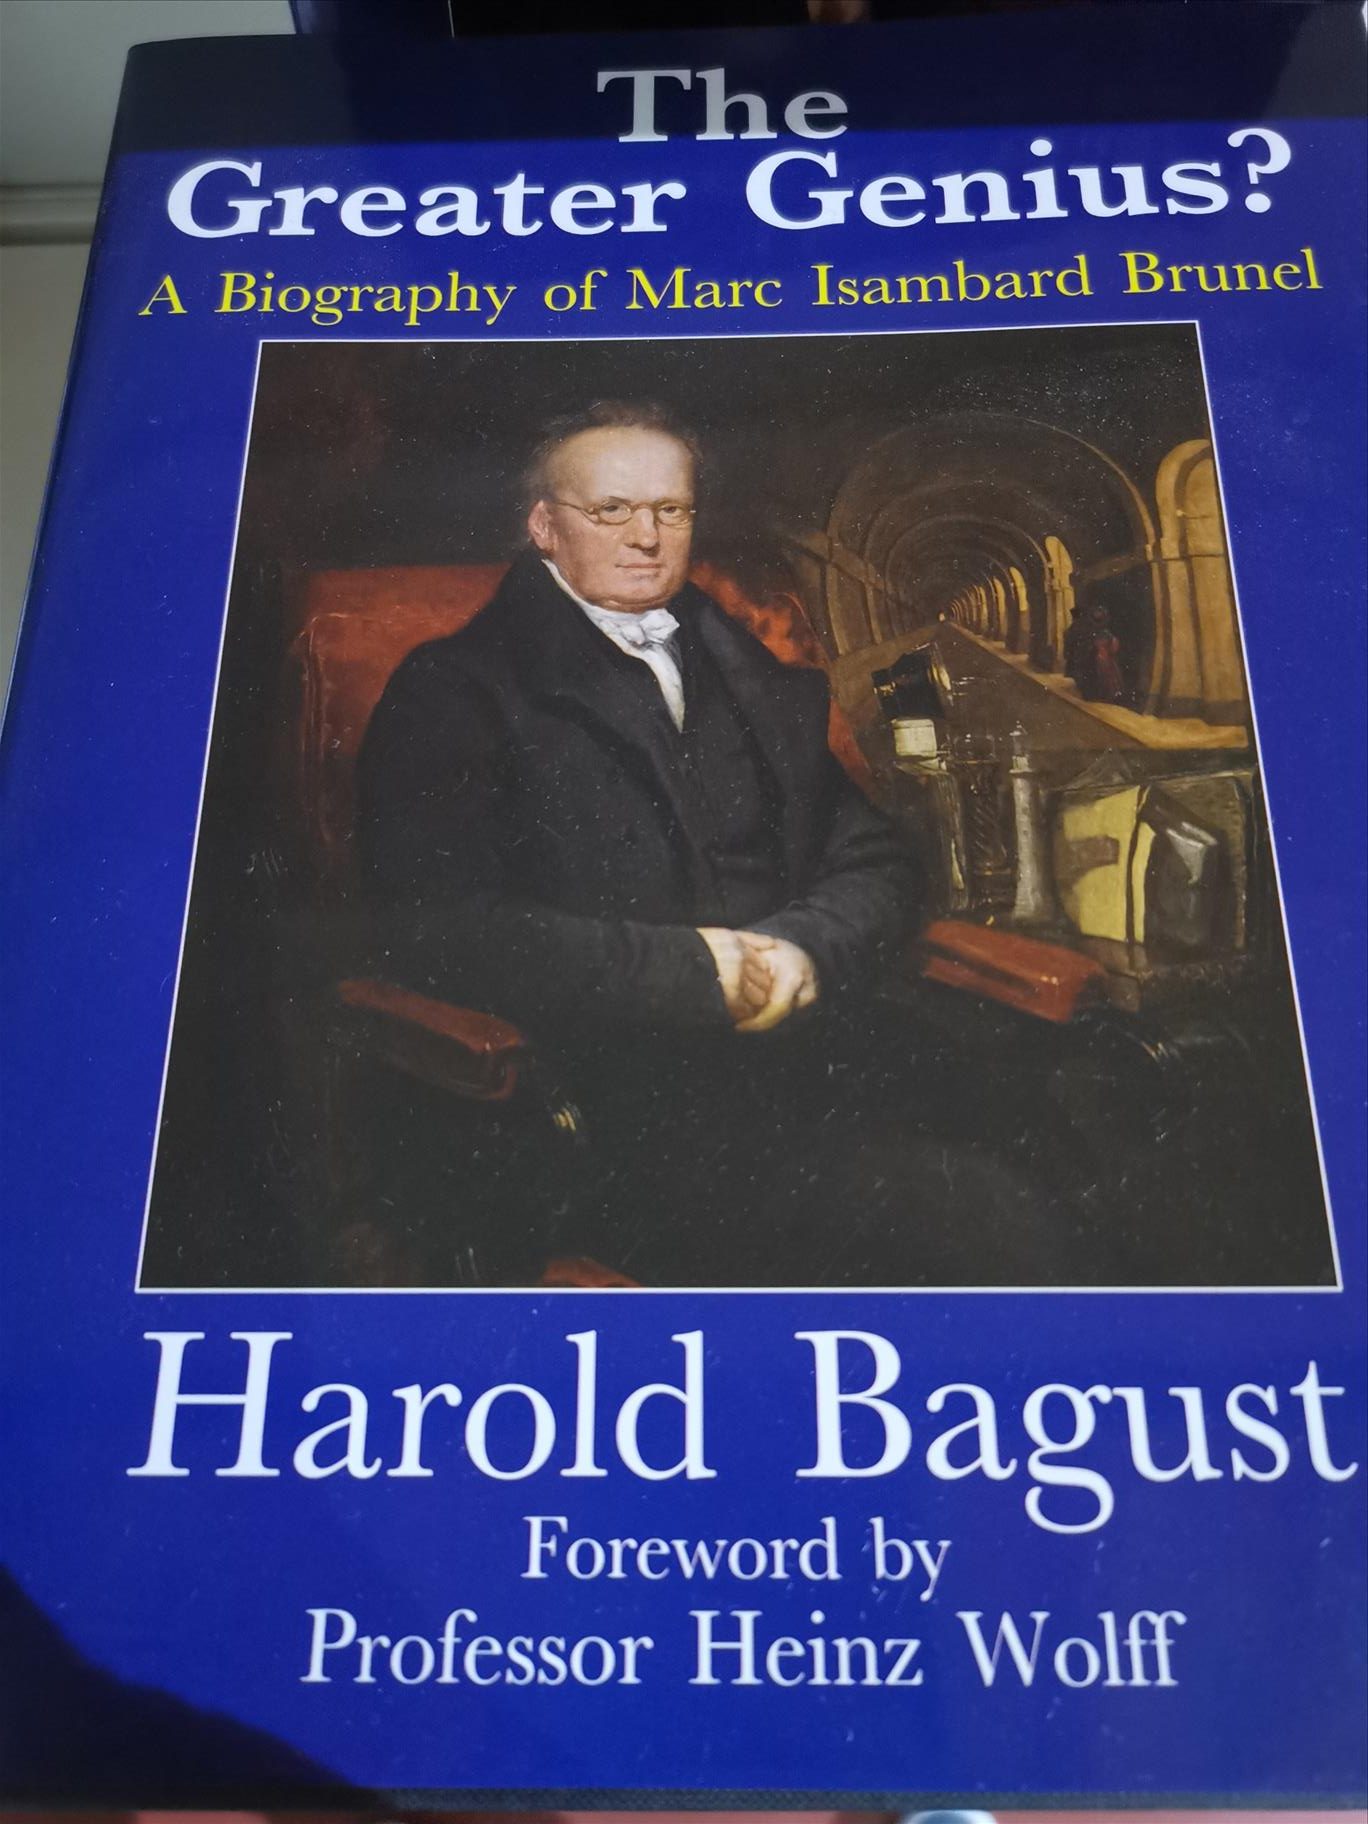 The Greater Genius? A biography of Marc Isambard Brunel by Harold Bagust